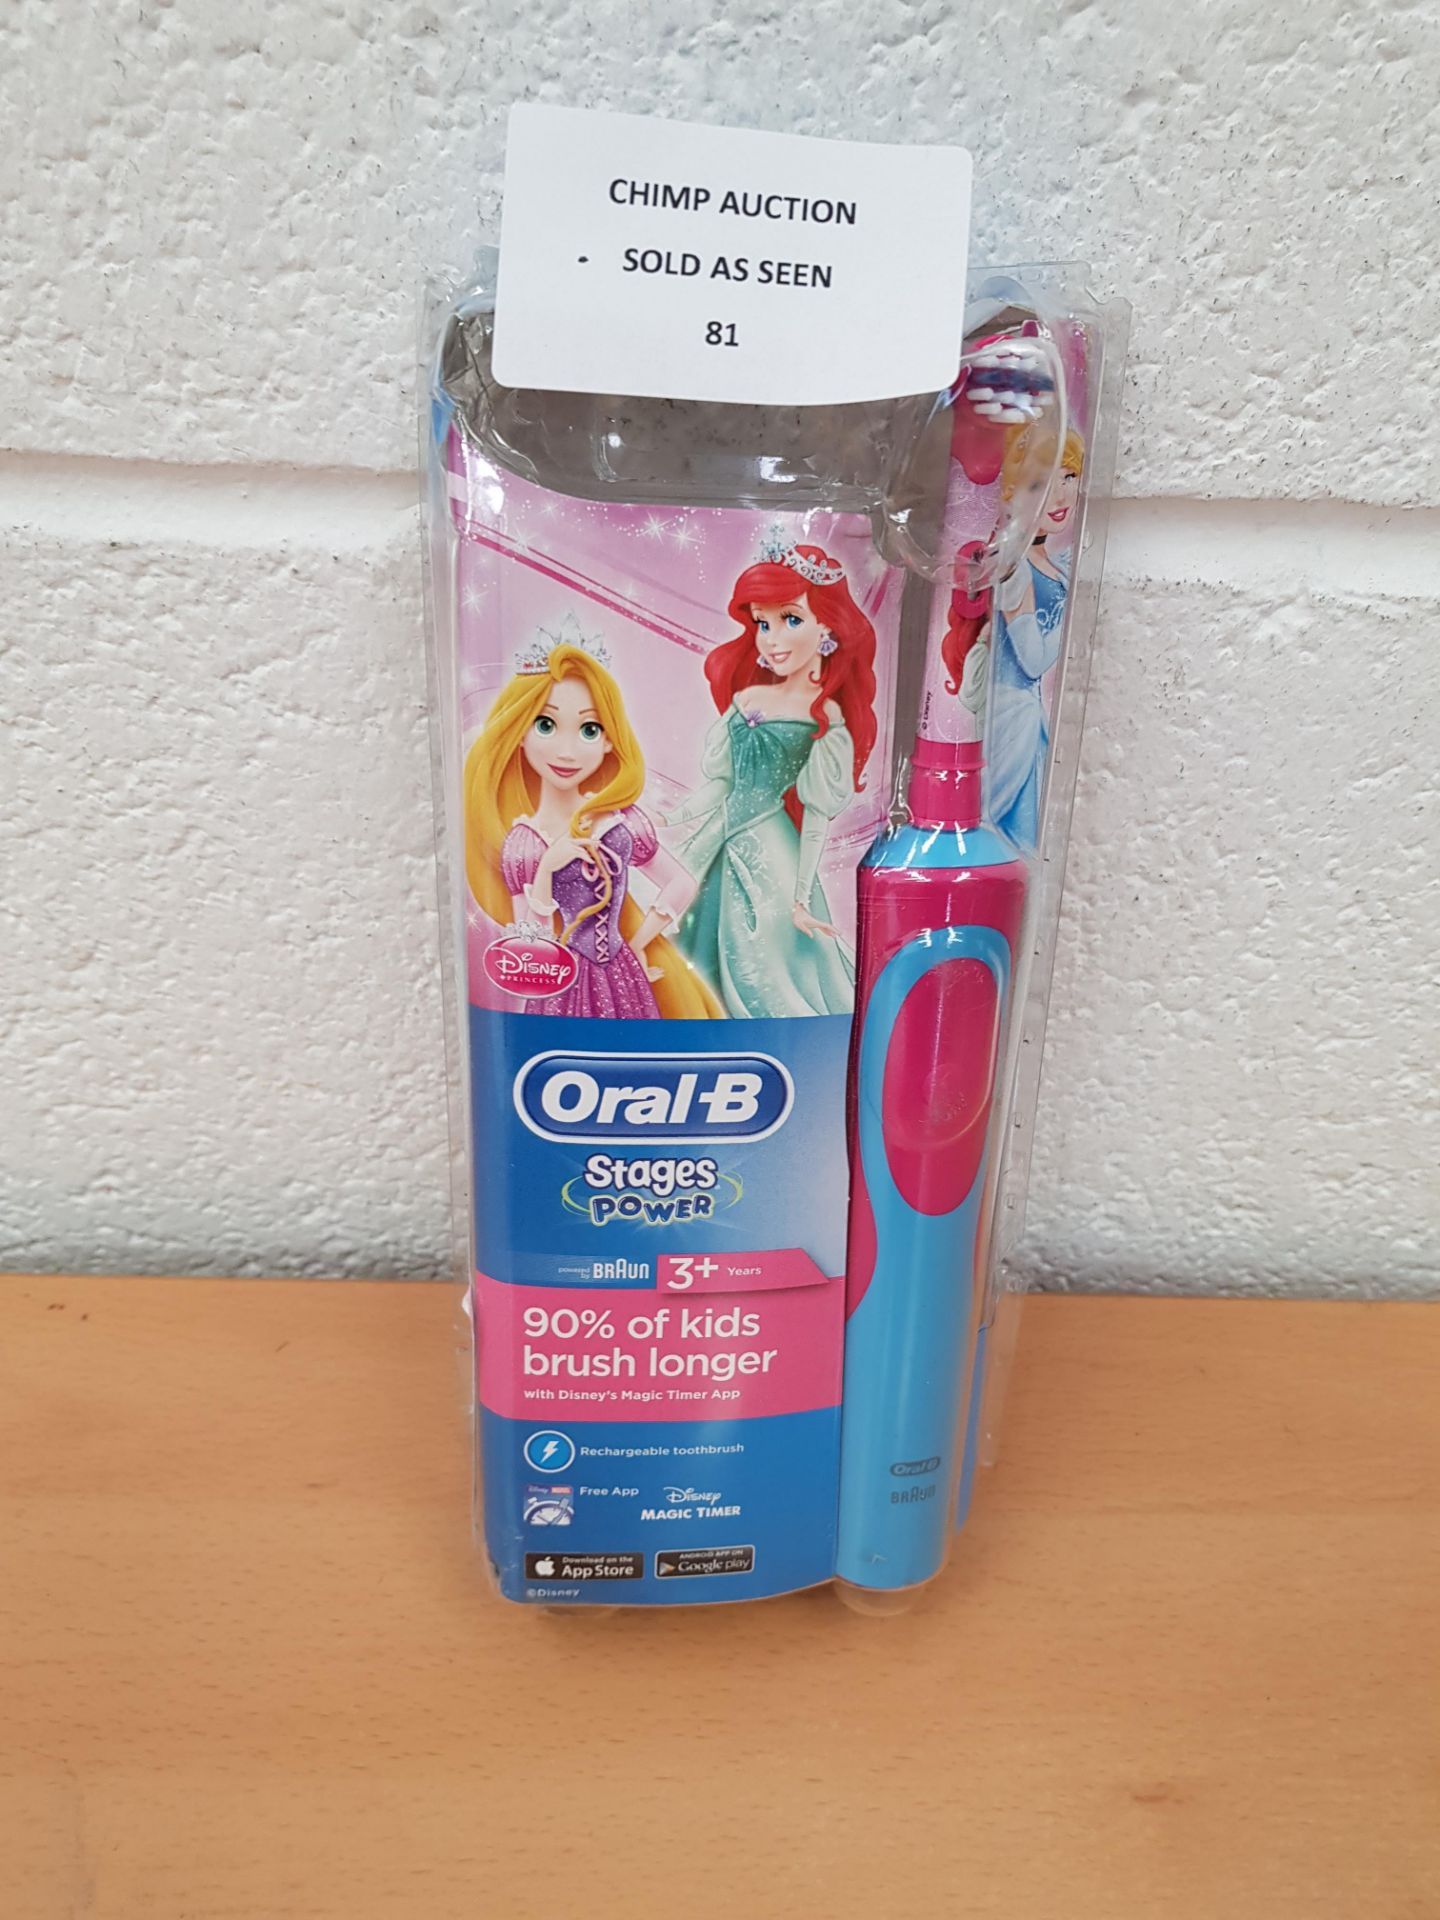 Oral-B Stages Power electric Kids Toothbrush